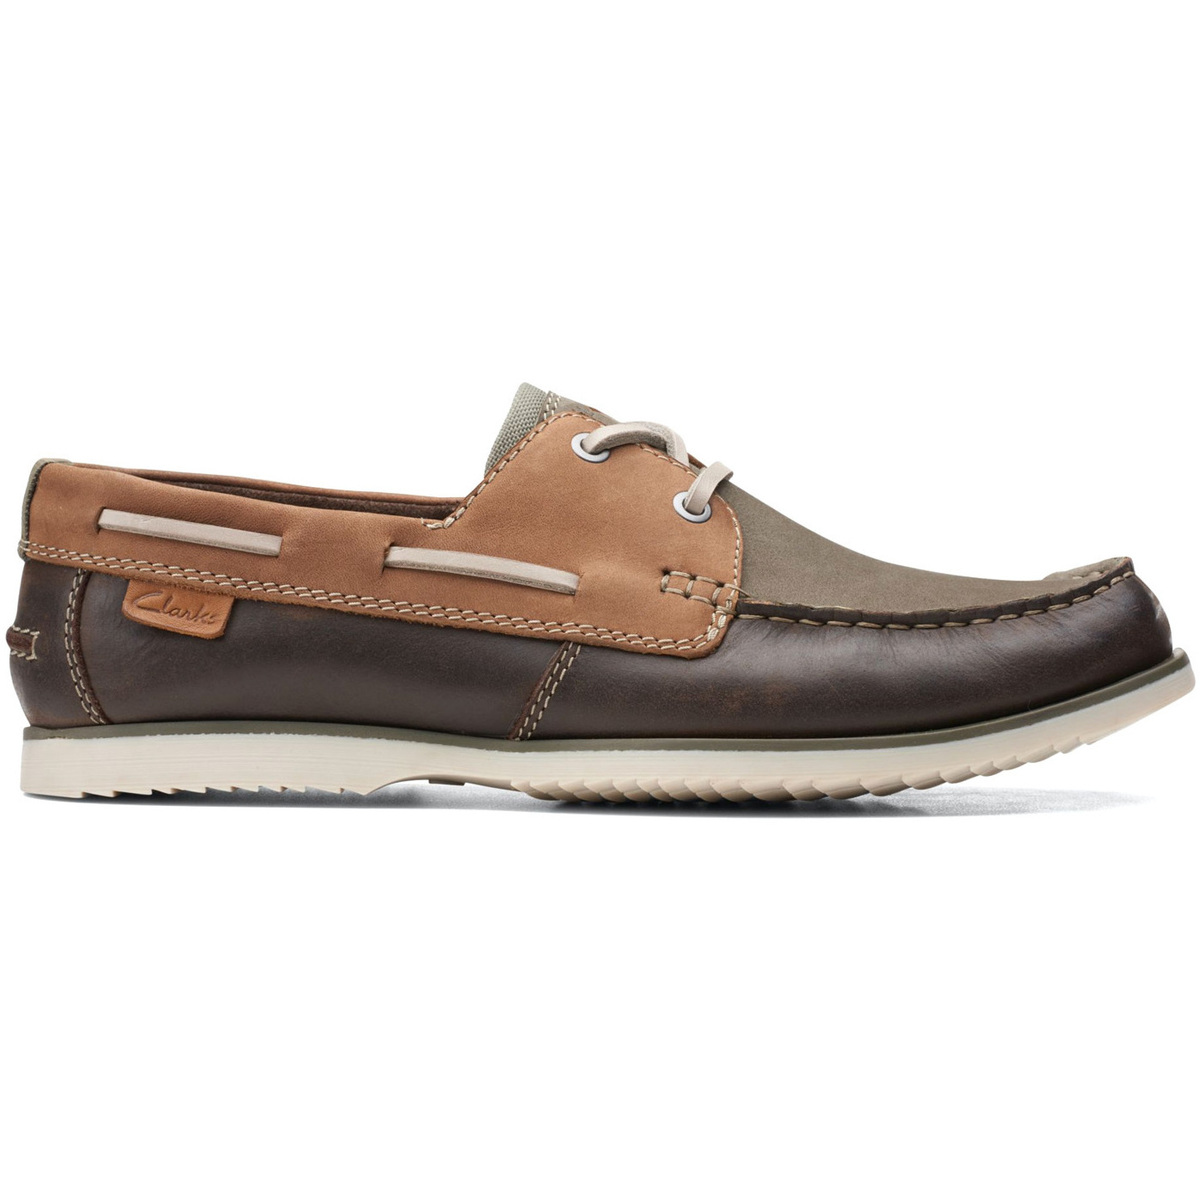 Boat shoes Clarks 26160220